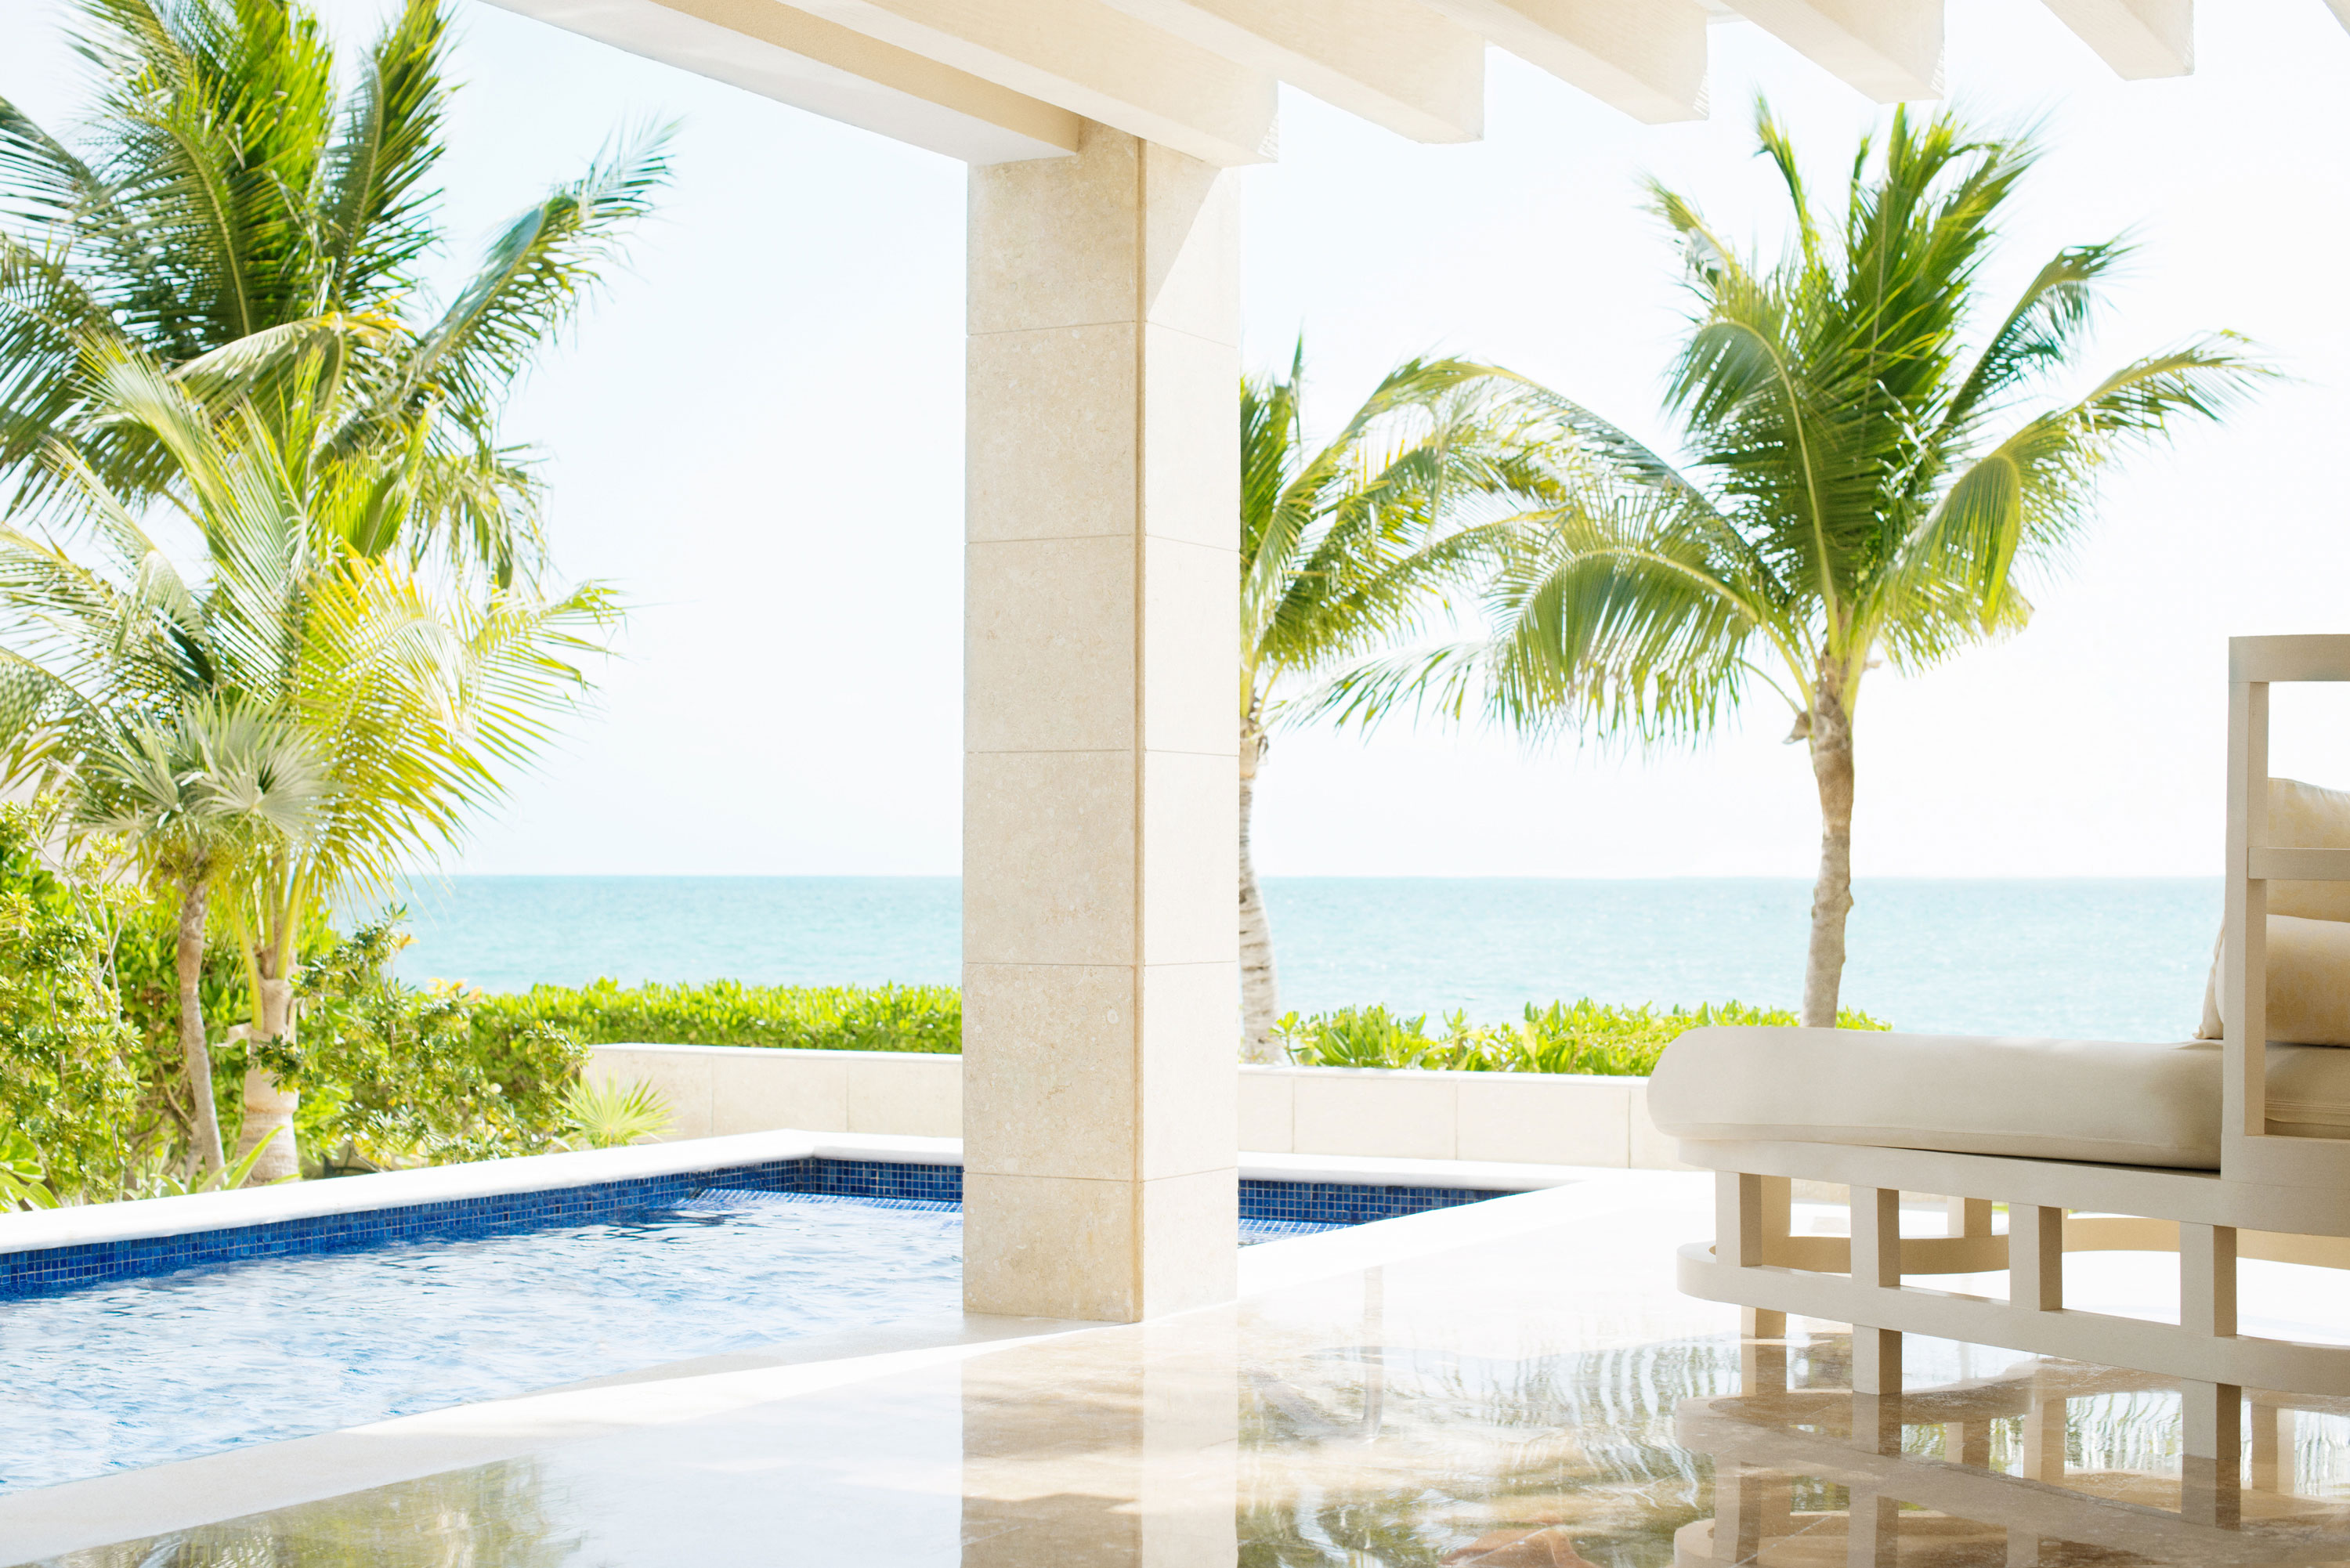 Casita suite with private pool overlooking the ocean